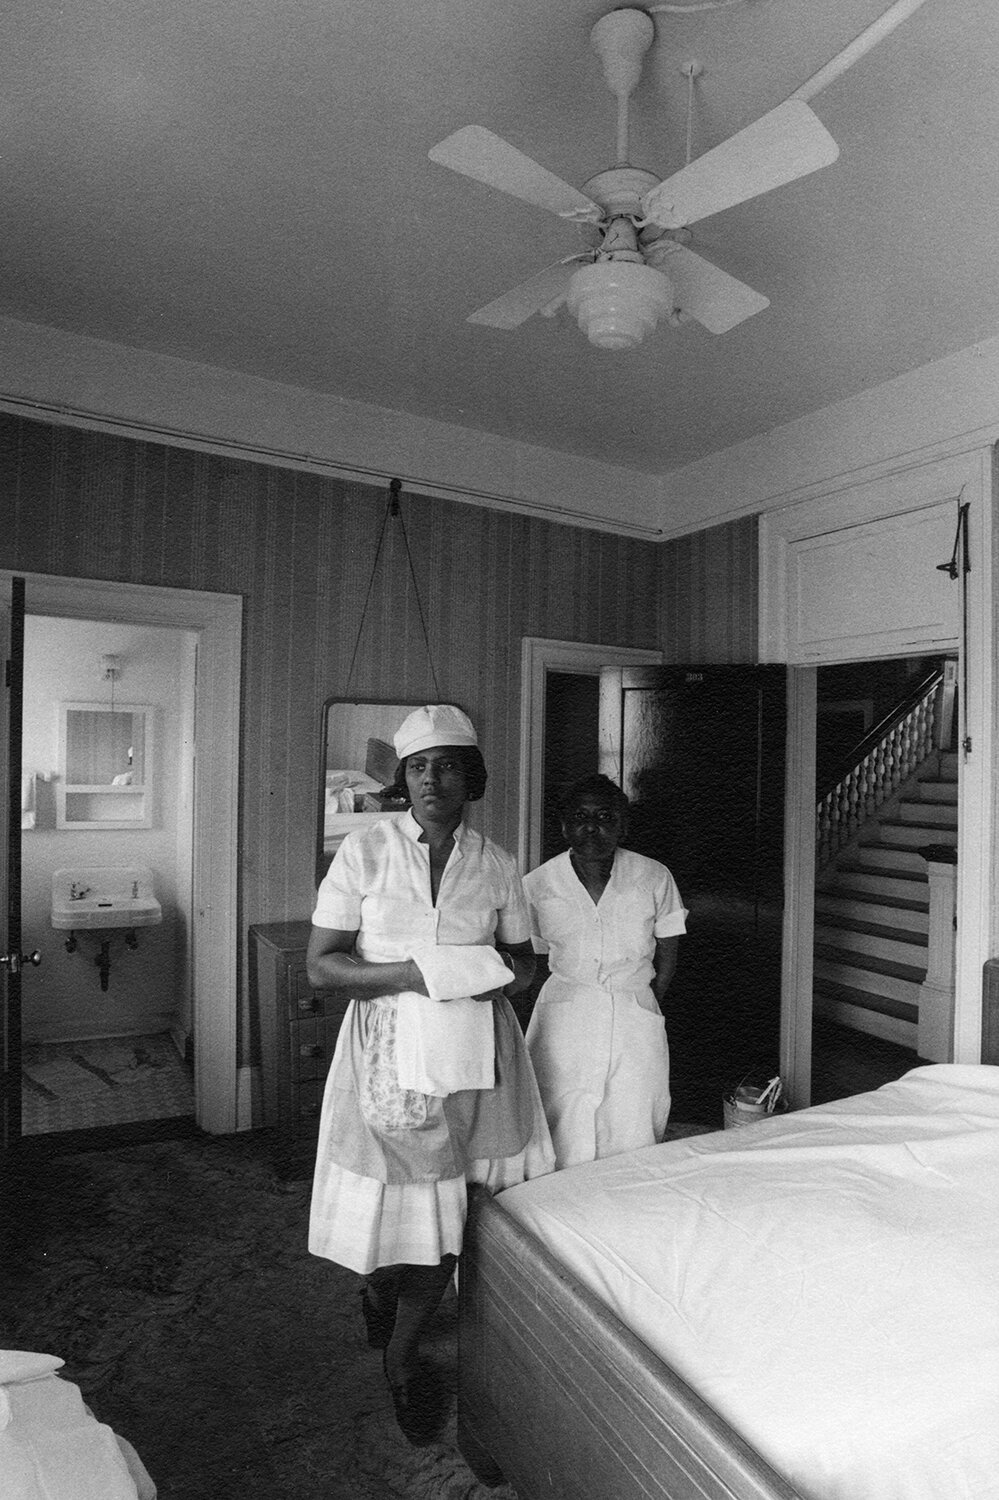   Maids, Stephen Decatur Hotel , 1970 Silver Gelatin Print 6 3/4 × 4 1/2 in. (image size) The Do Good Fund, Inc., 2017-37 